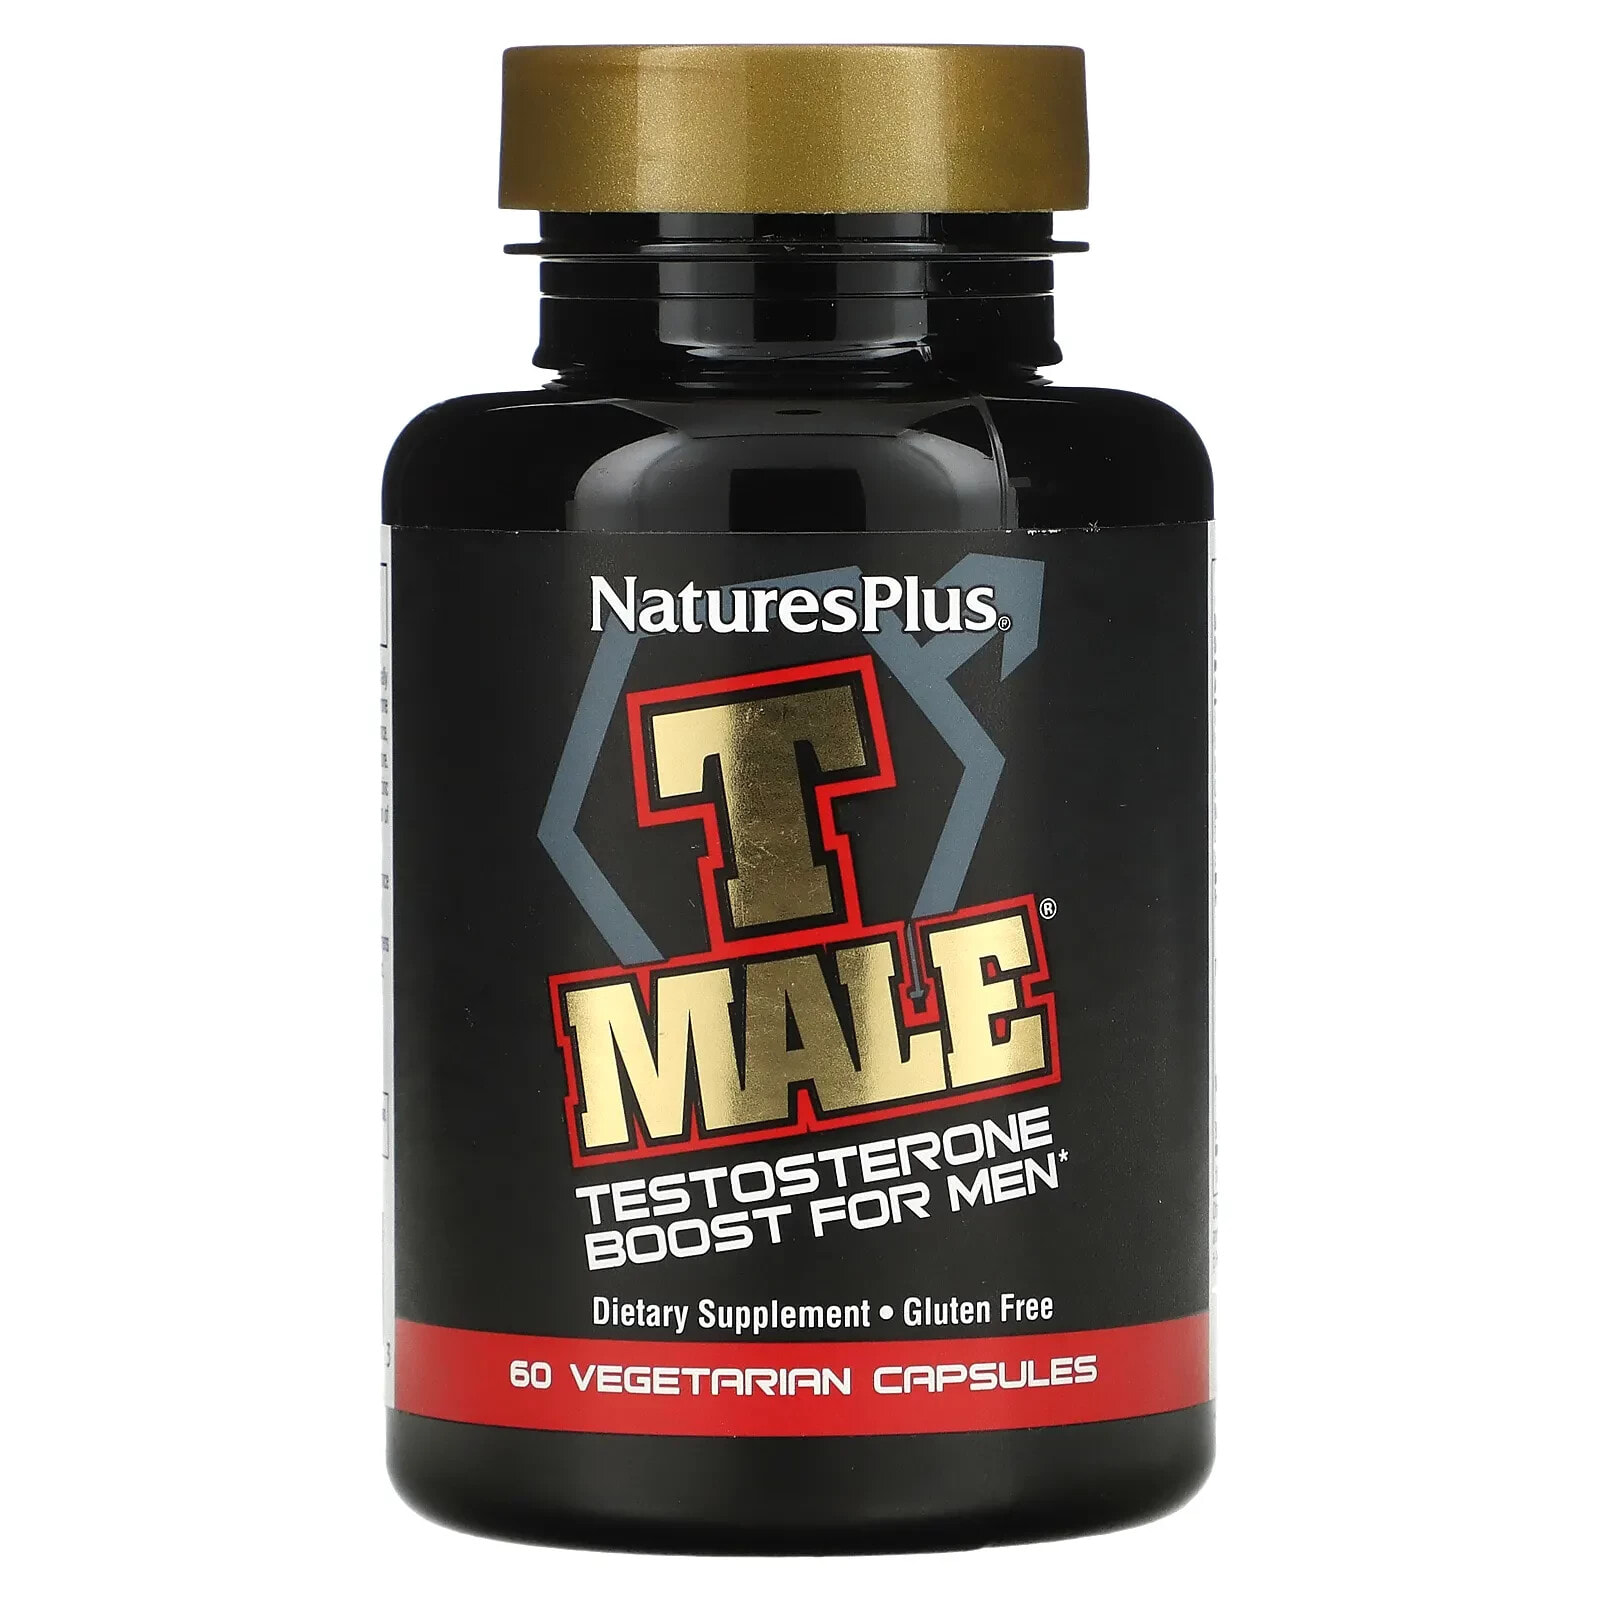 T Male, Testosterone Boost For Men, 60 Vegetarian Capsules